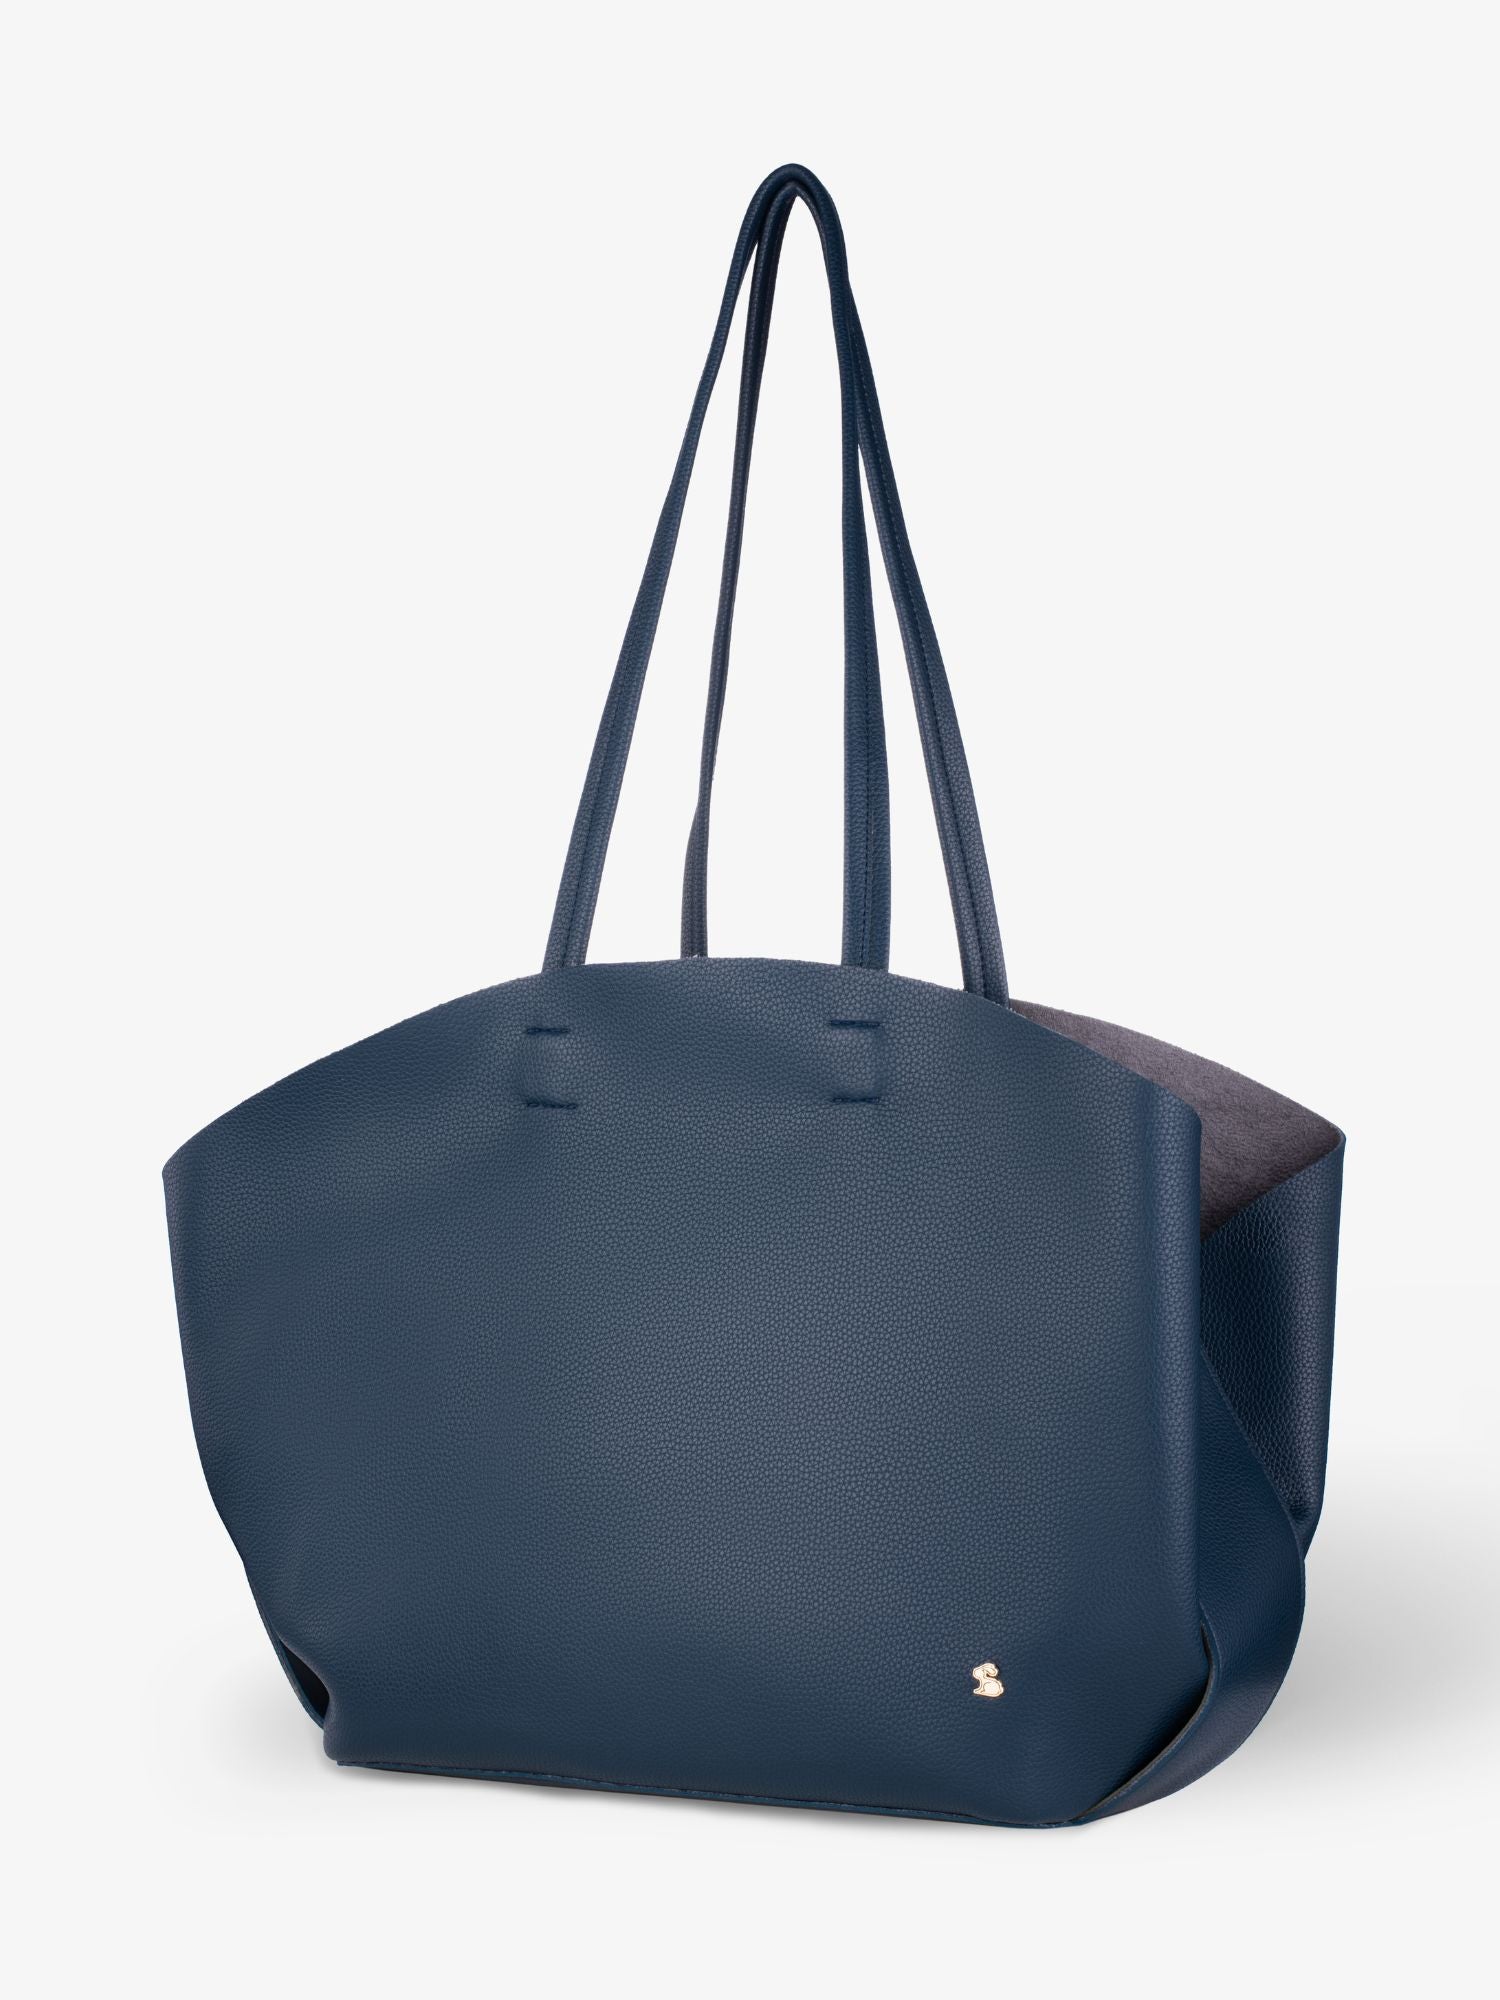 oversized tote bags